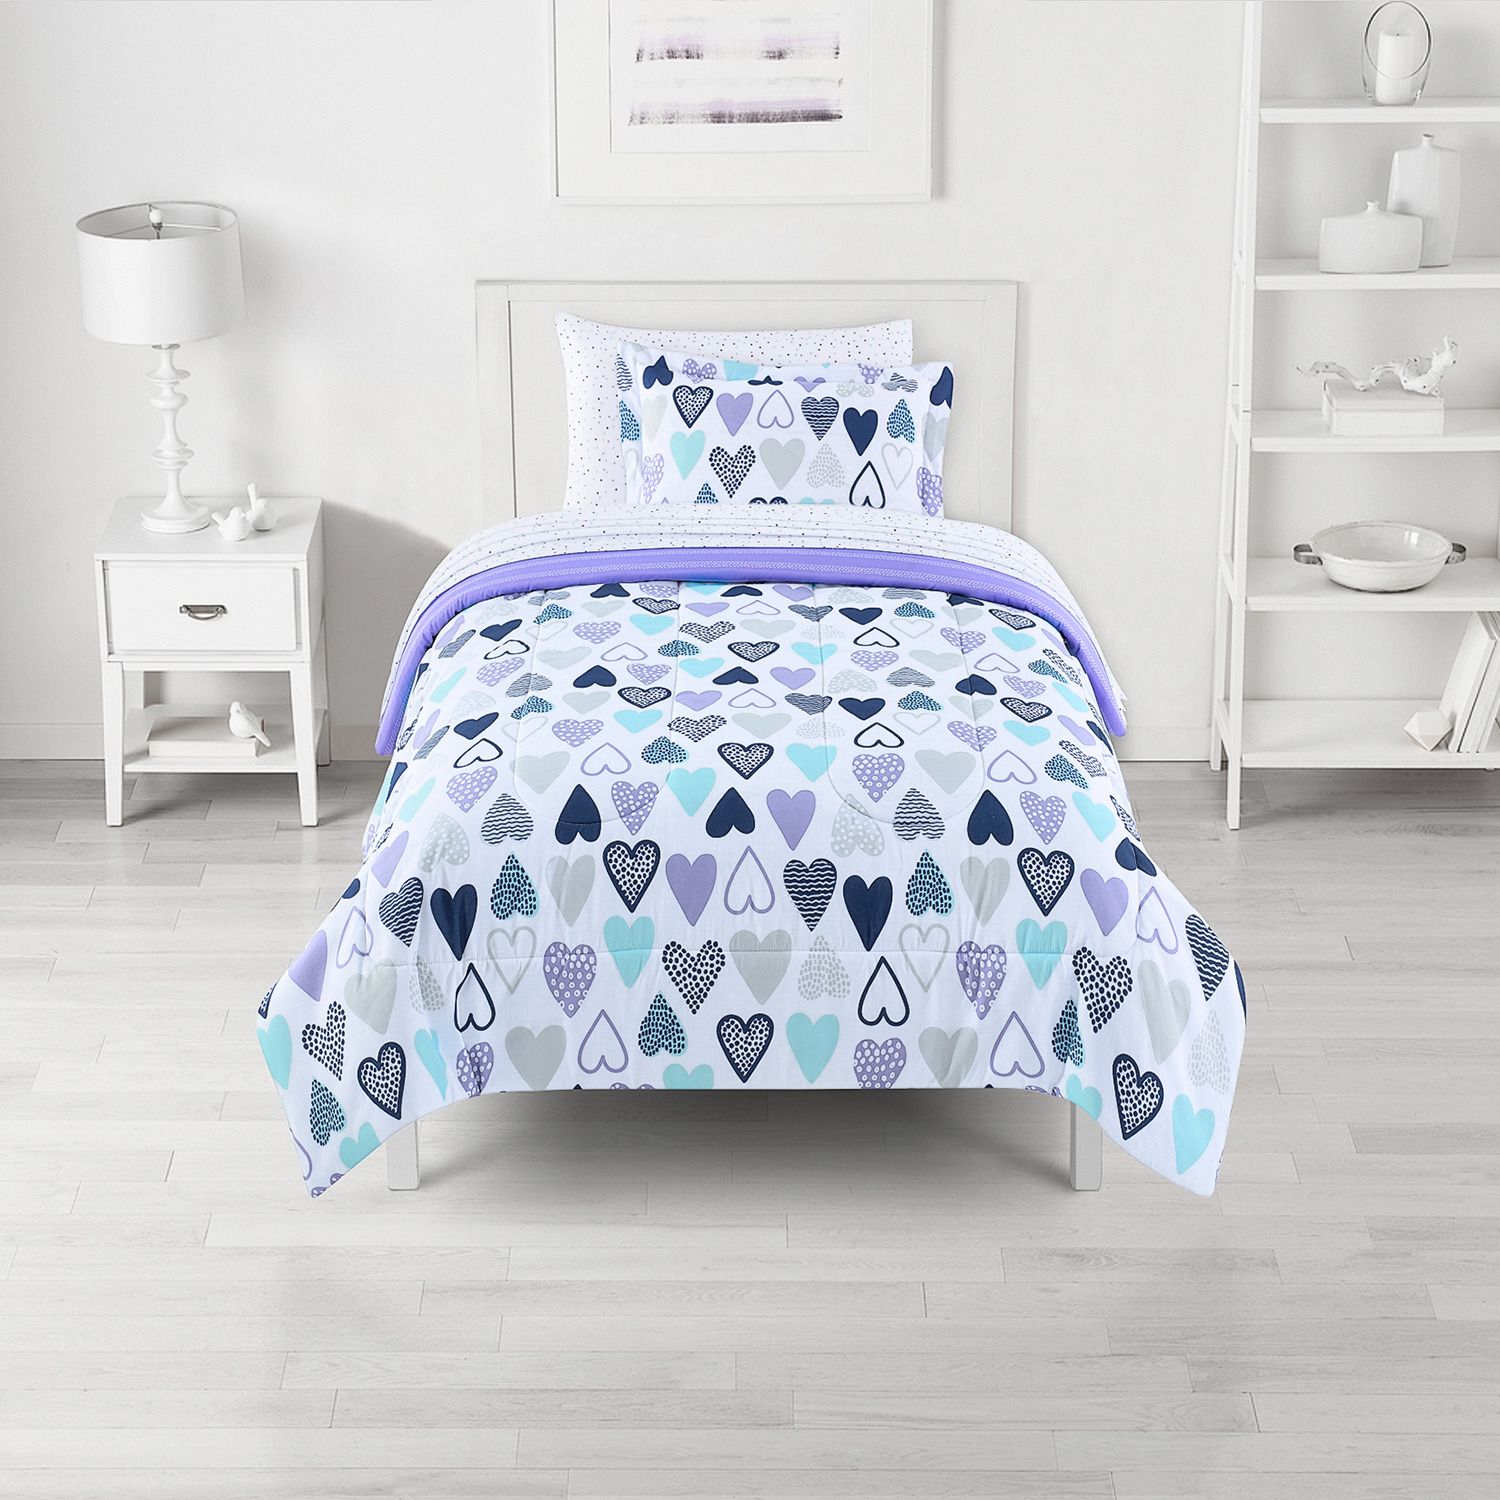 cute bed sets for girls